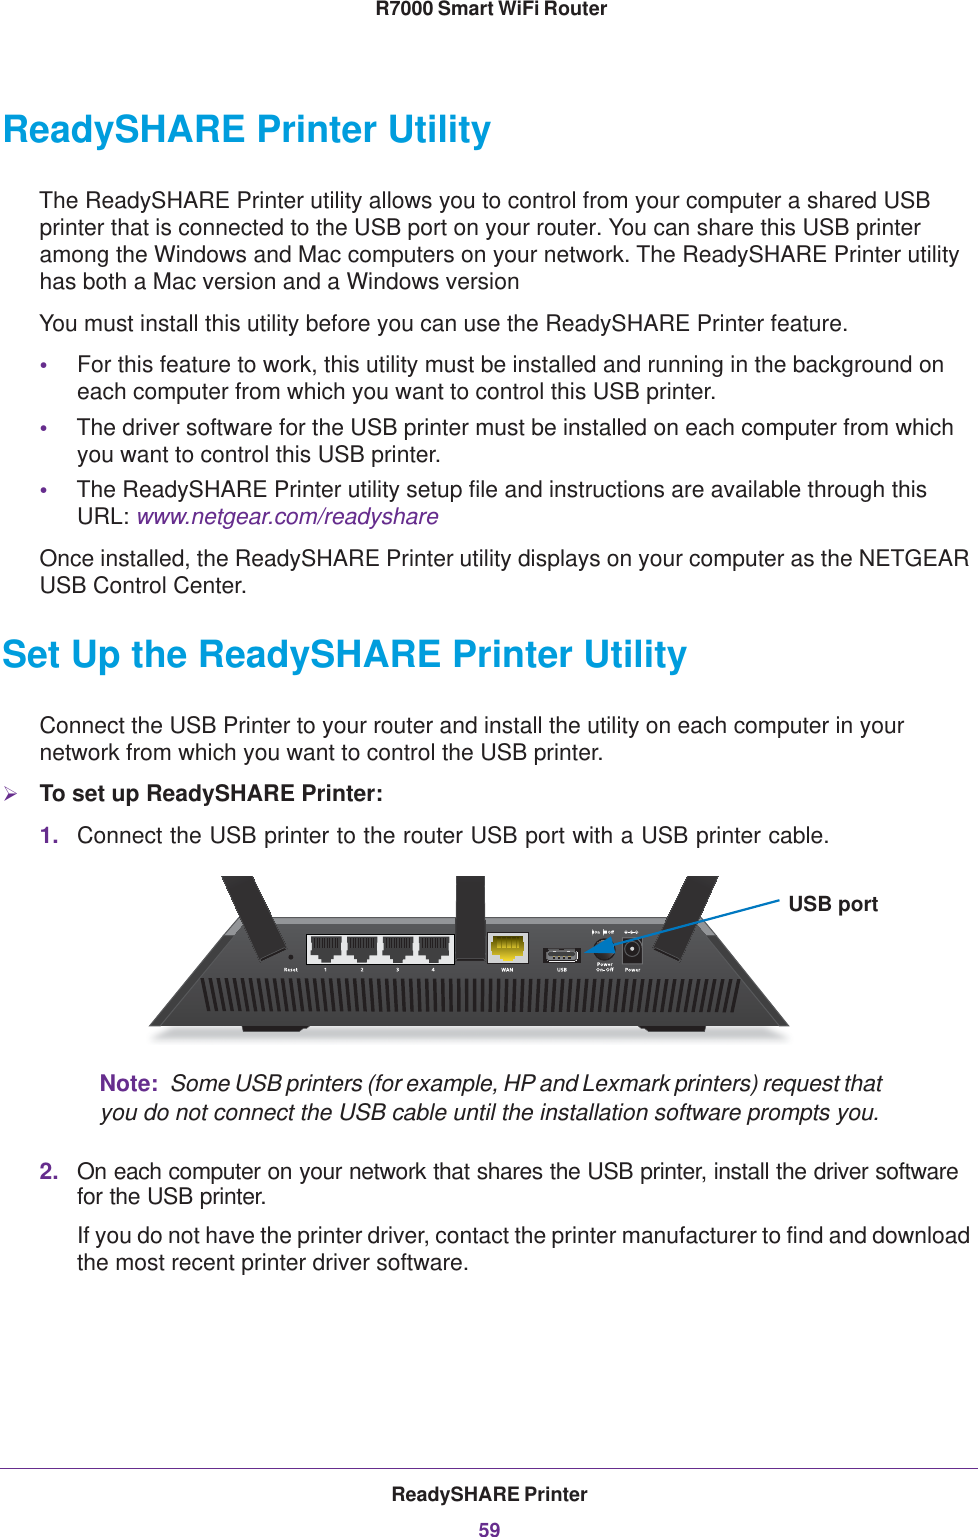 ReadySHARE Printer59 R7000 Smart WiFi RouterReadySHARE Printer UtilityThe ReadySHARE Printer utility allows you to control from your computer a shared USB printer that is connected to the USB port on your router. You can share this USB printer among the Windows and Mac computers on your network. The ReadySHARE Printer utility has both a Mac version and a Windows versionYou must install this utility before you can use the ReadySHARE Printer feature.•For this feature to work, this utility must be installed and running in the background on each computer from which you want to control this USB printer.•The driver software for the USB printer must be installed on each computer from which you want to control this USB printer.•The ReadySHARE Printer utility setup file and instructions are available through this URL: www.netgear.com/readyshareOnce installed, the ReadySHARE Printer utility displays on your computer as the NETGEAR USB Control Center.Set Up the ReadySHARE Printer UtilityConnect the USB Printer to your router and install the utility on each computer in your network from which you want to control the USB printer. To set up ReadySHARE Printer:1. Connect the USB printer to the router USB port with a USB printer cable. USB portNote:  Some USB printers (for example, HP and Lexmark printers) request that you do not connect the USB cable until the installation software prompts you.2. On each computer on your network that shares the USB printer, install the driver software for the USB printer.If you do not have the printer driver, contact the printer manufacturer to find and download the most recent printer driver software.